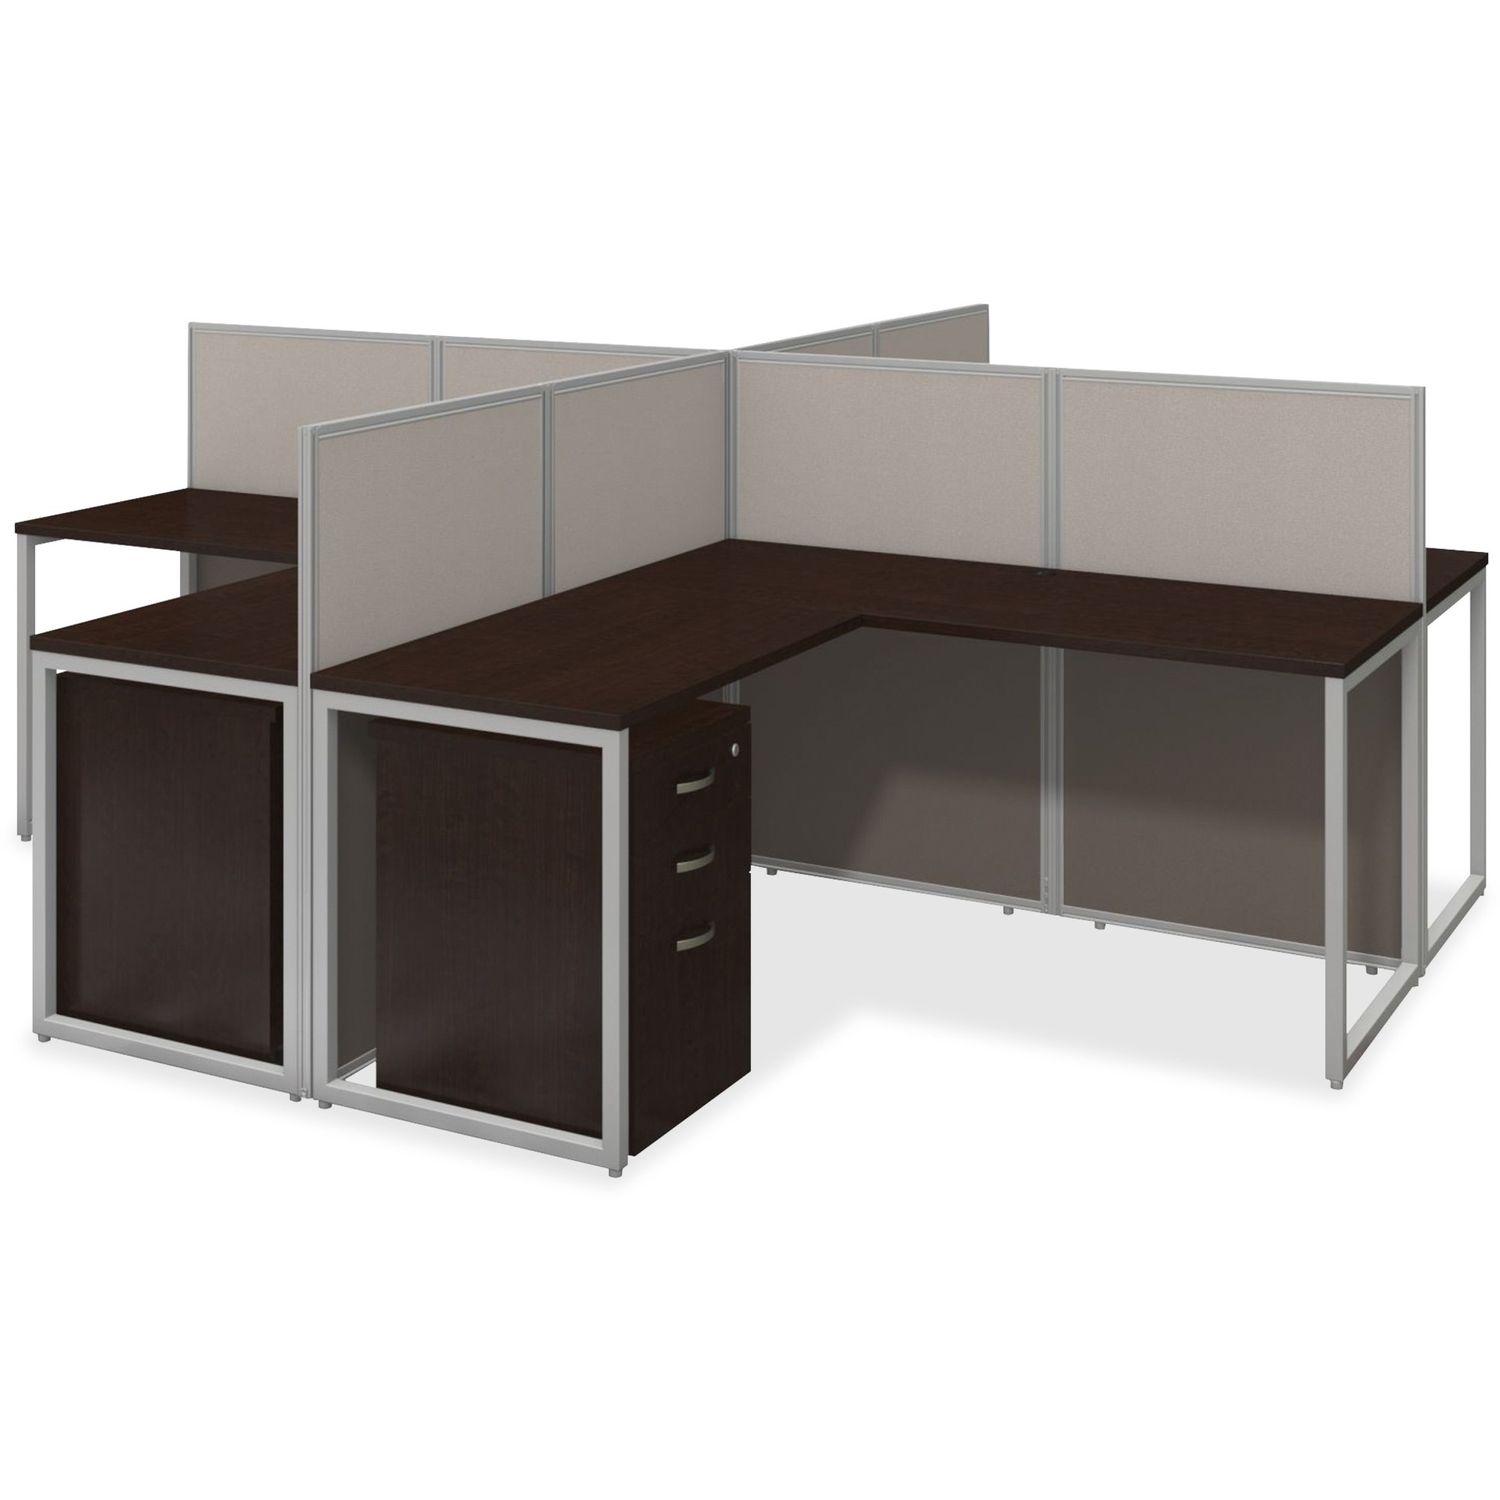 60W 4 Person L Desk Open Office with 3 Drawer Mobile Pedestals Mocha Cherry L-shaped Top, 3 Drawers x 119.09" Table Top Width x 119.09" Table Top Depth, 44.88" Height, Assembly Required